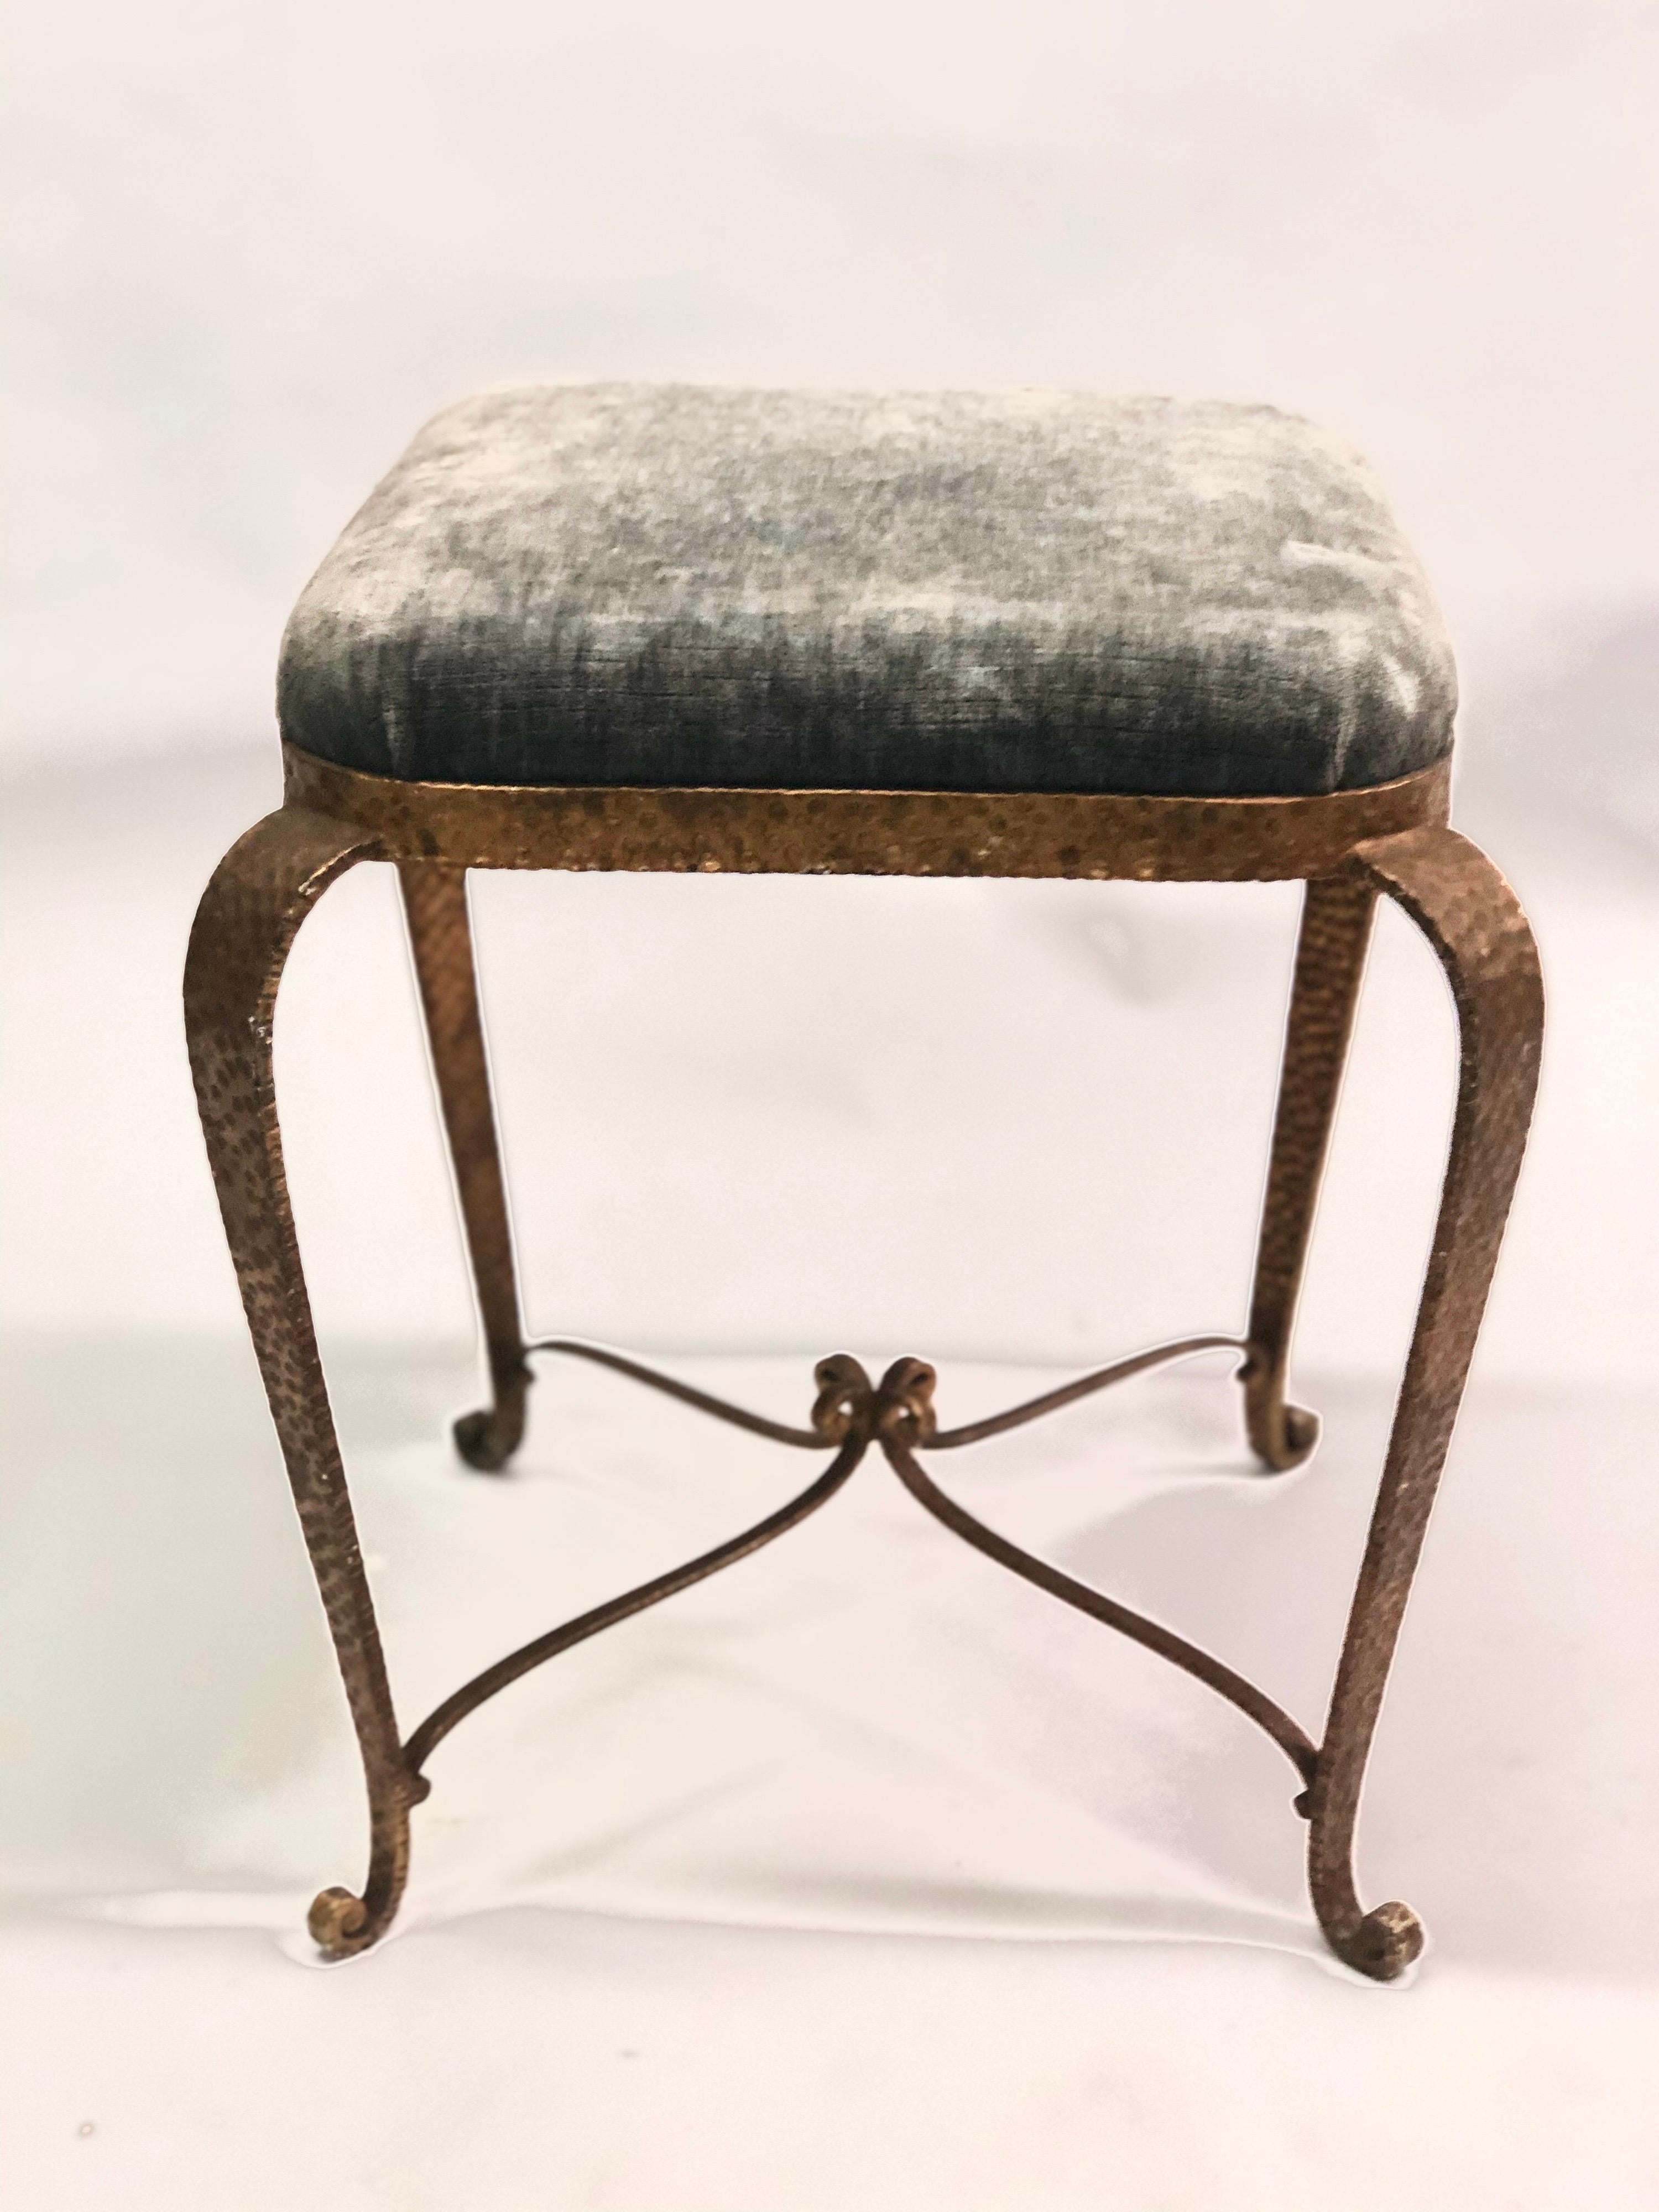 Upholstery Italian Modern Neoclassical Gilt Iron Stools / Benches by Pier Luigi Colli, Pair For Sale